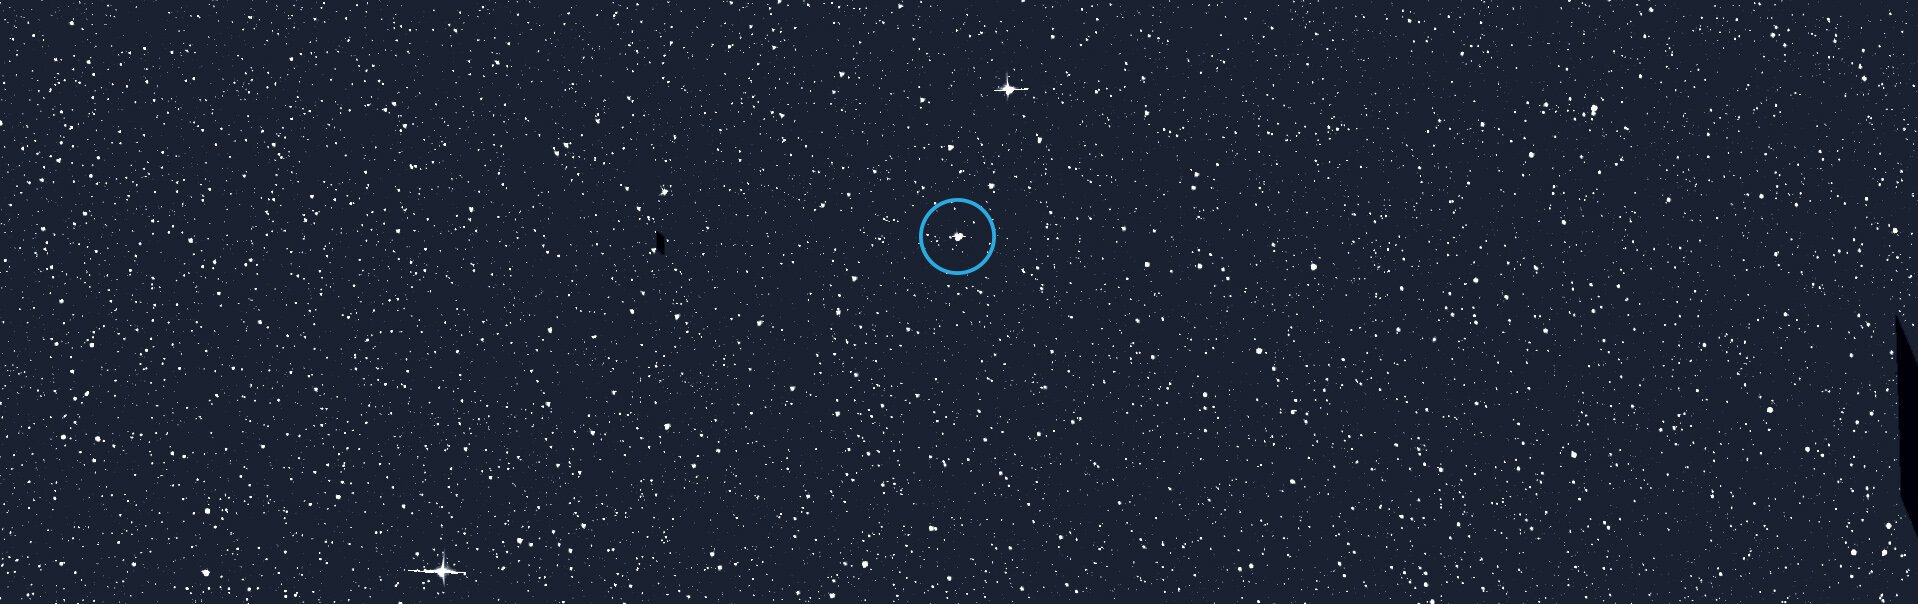 The star Alpha Draconis (circled), also known as Thuban, has long been known to be a binary system.